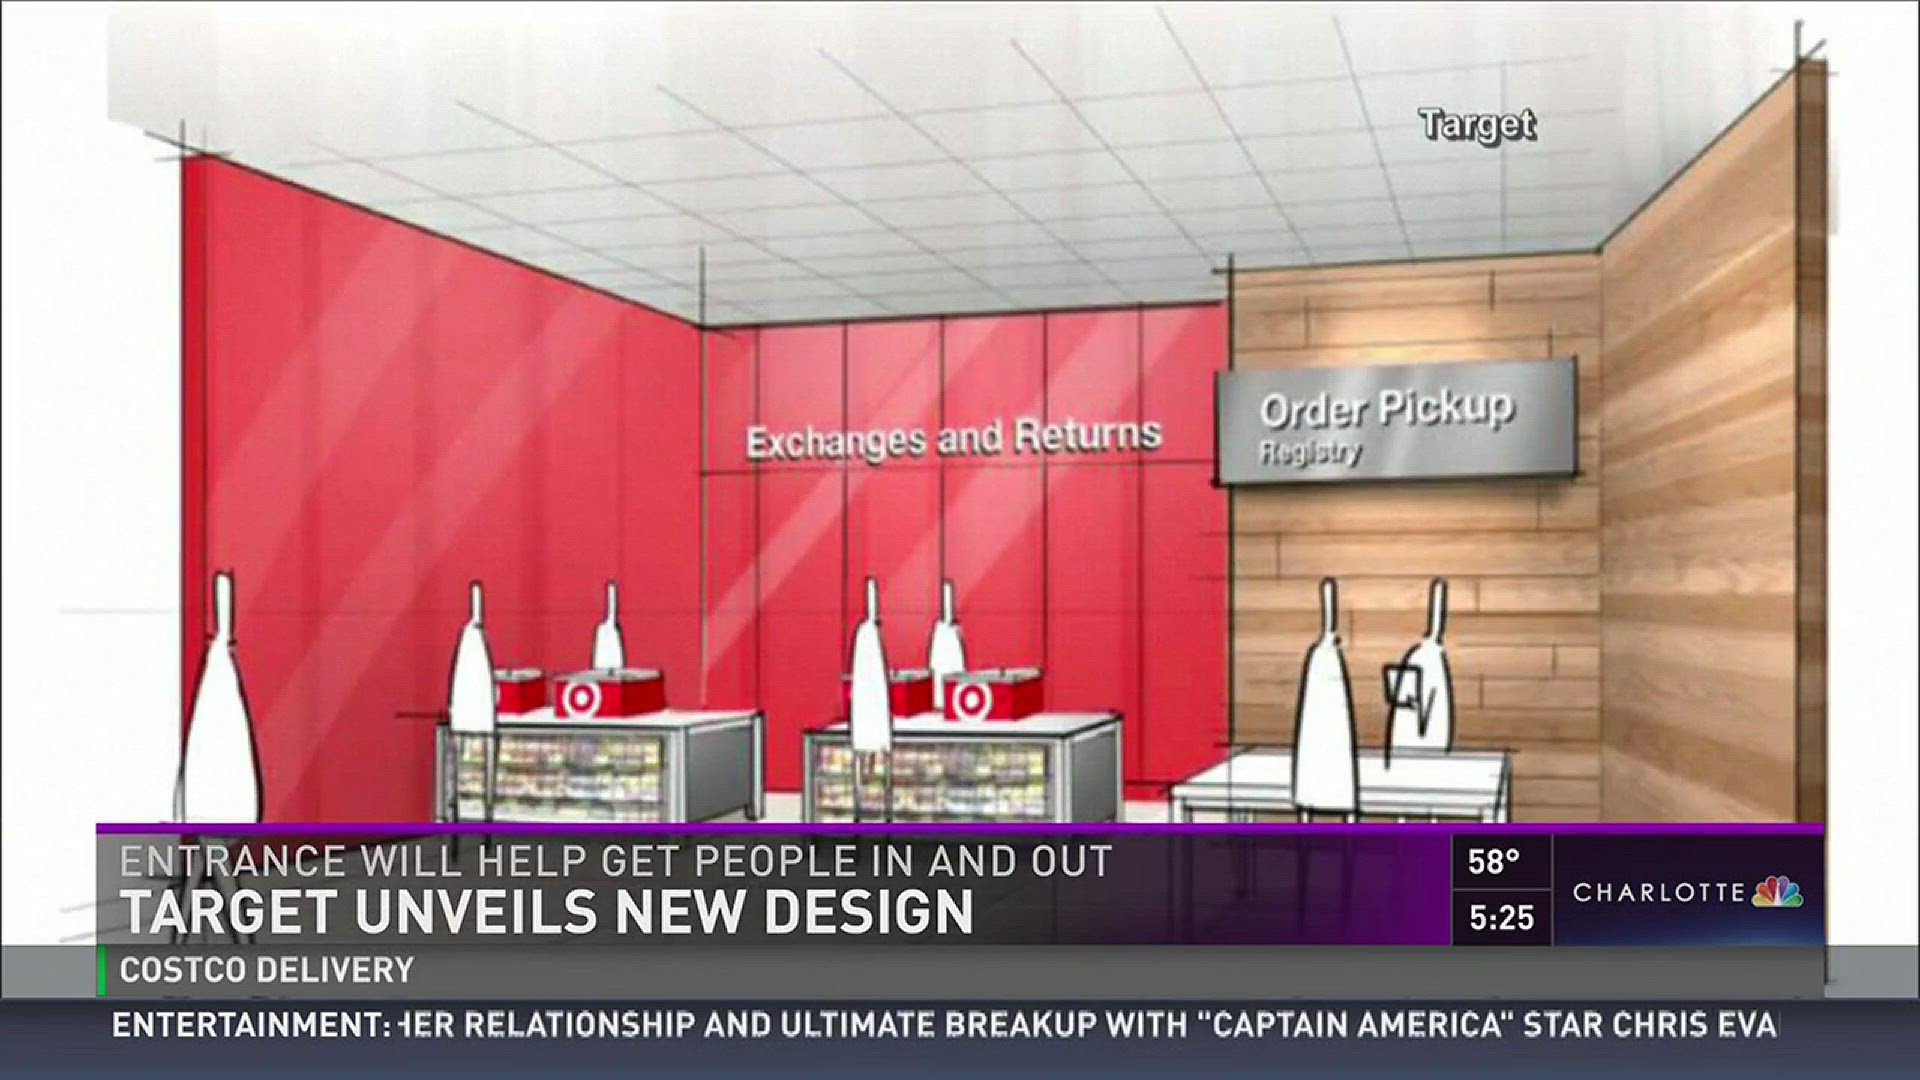 Target unveiled a new store design that will be part of the revamping of more than 500 stores nationwide.